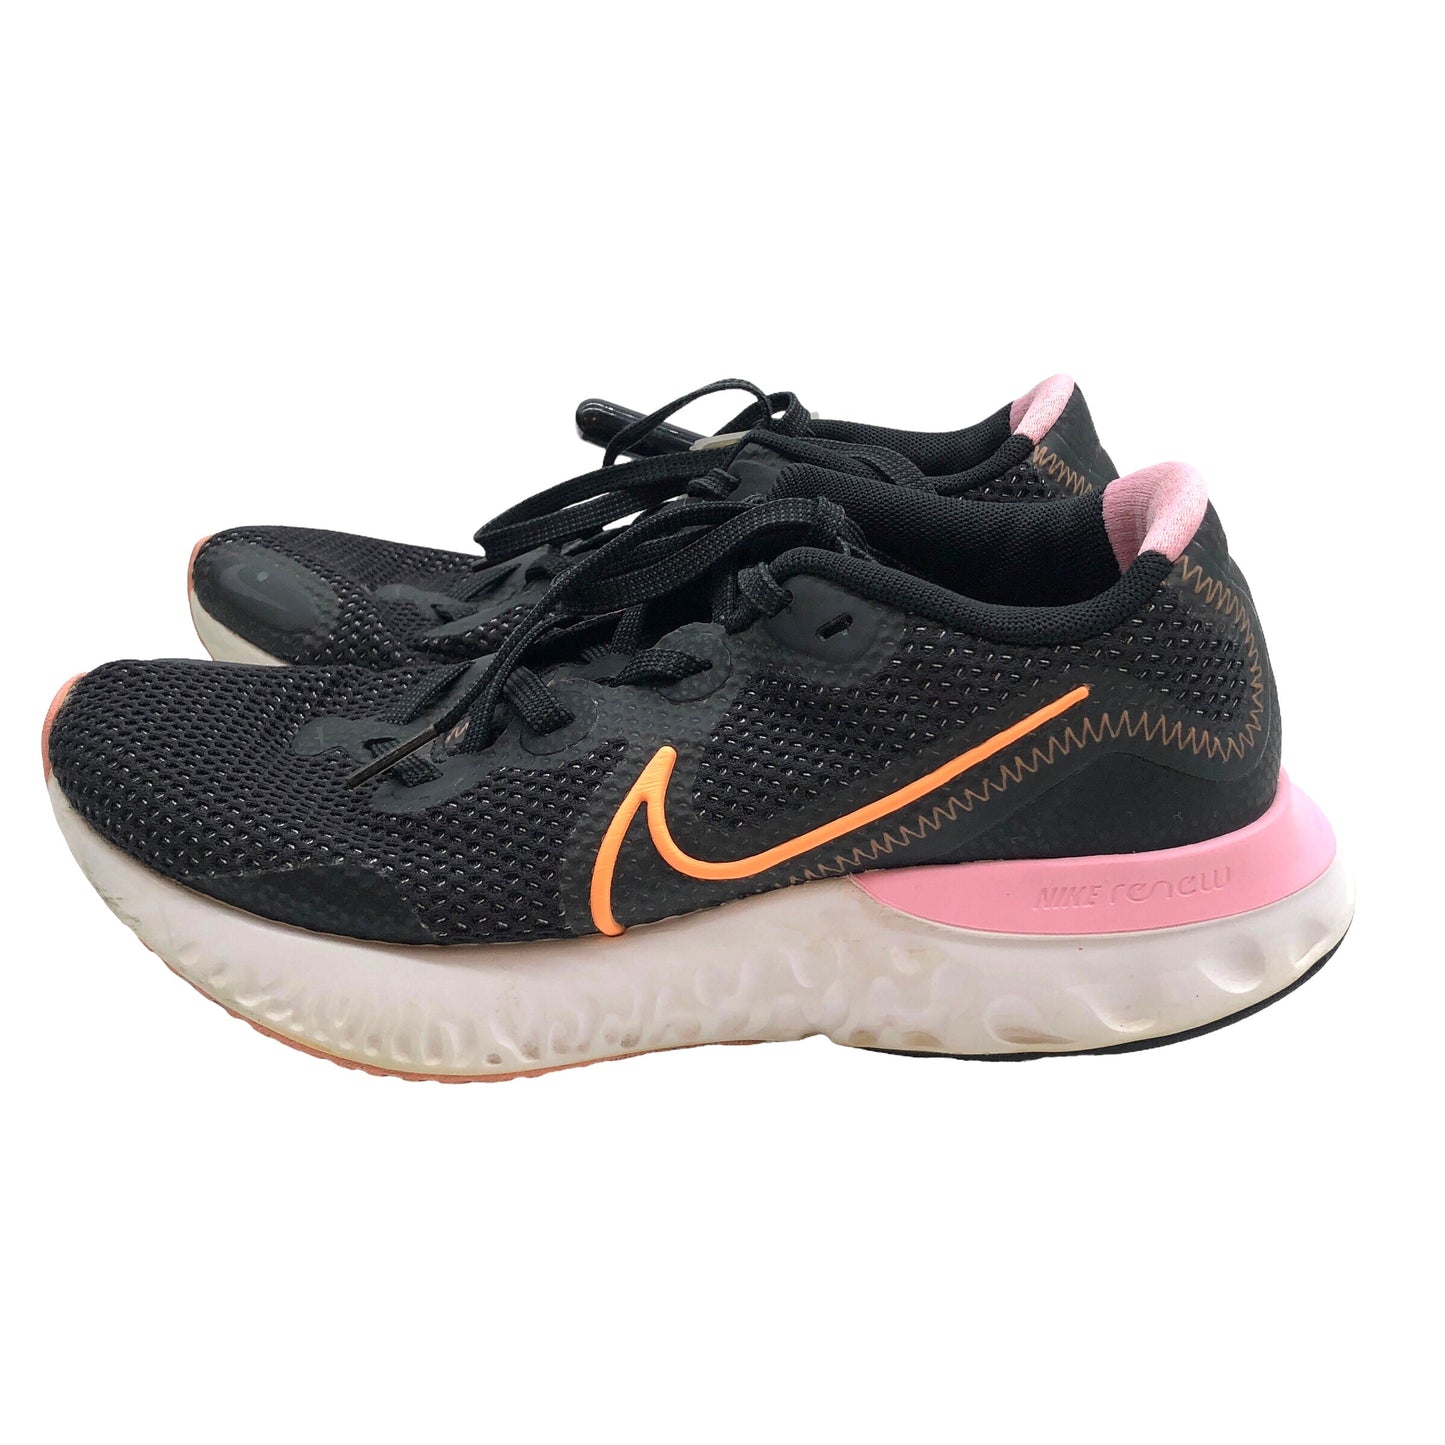 Black & Pink Shoes Athletic Nike, Size 6.5